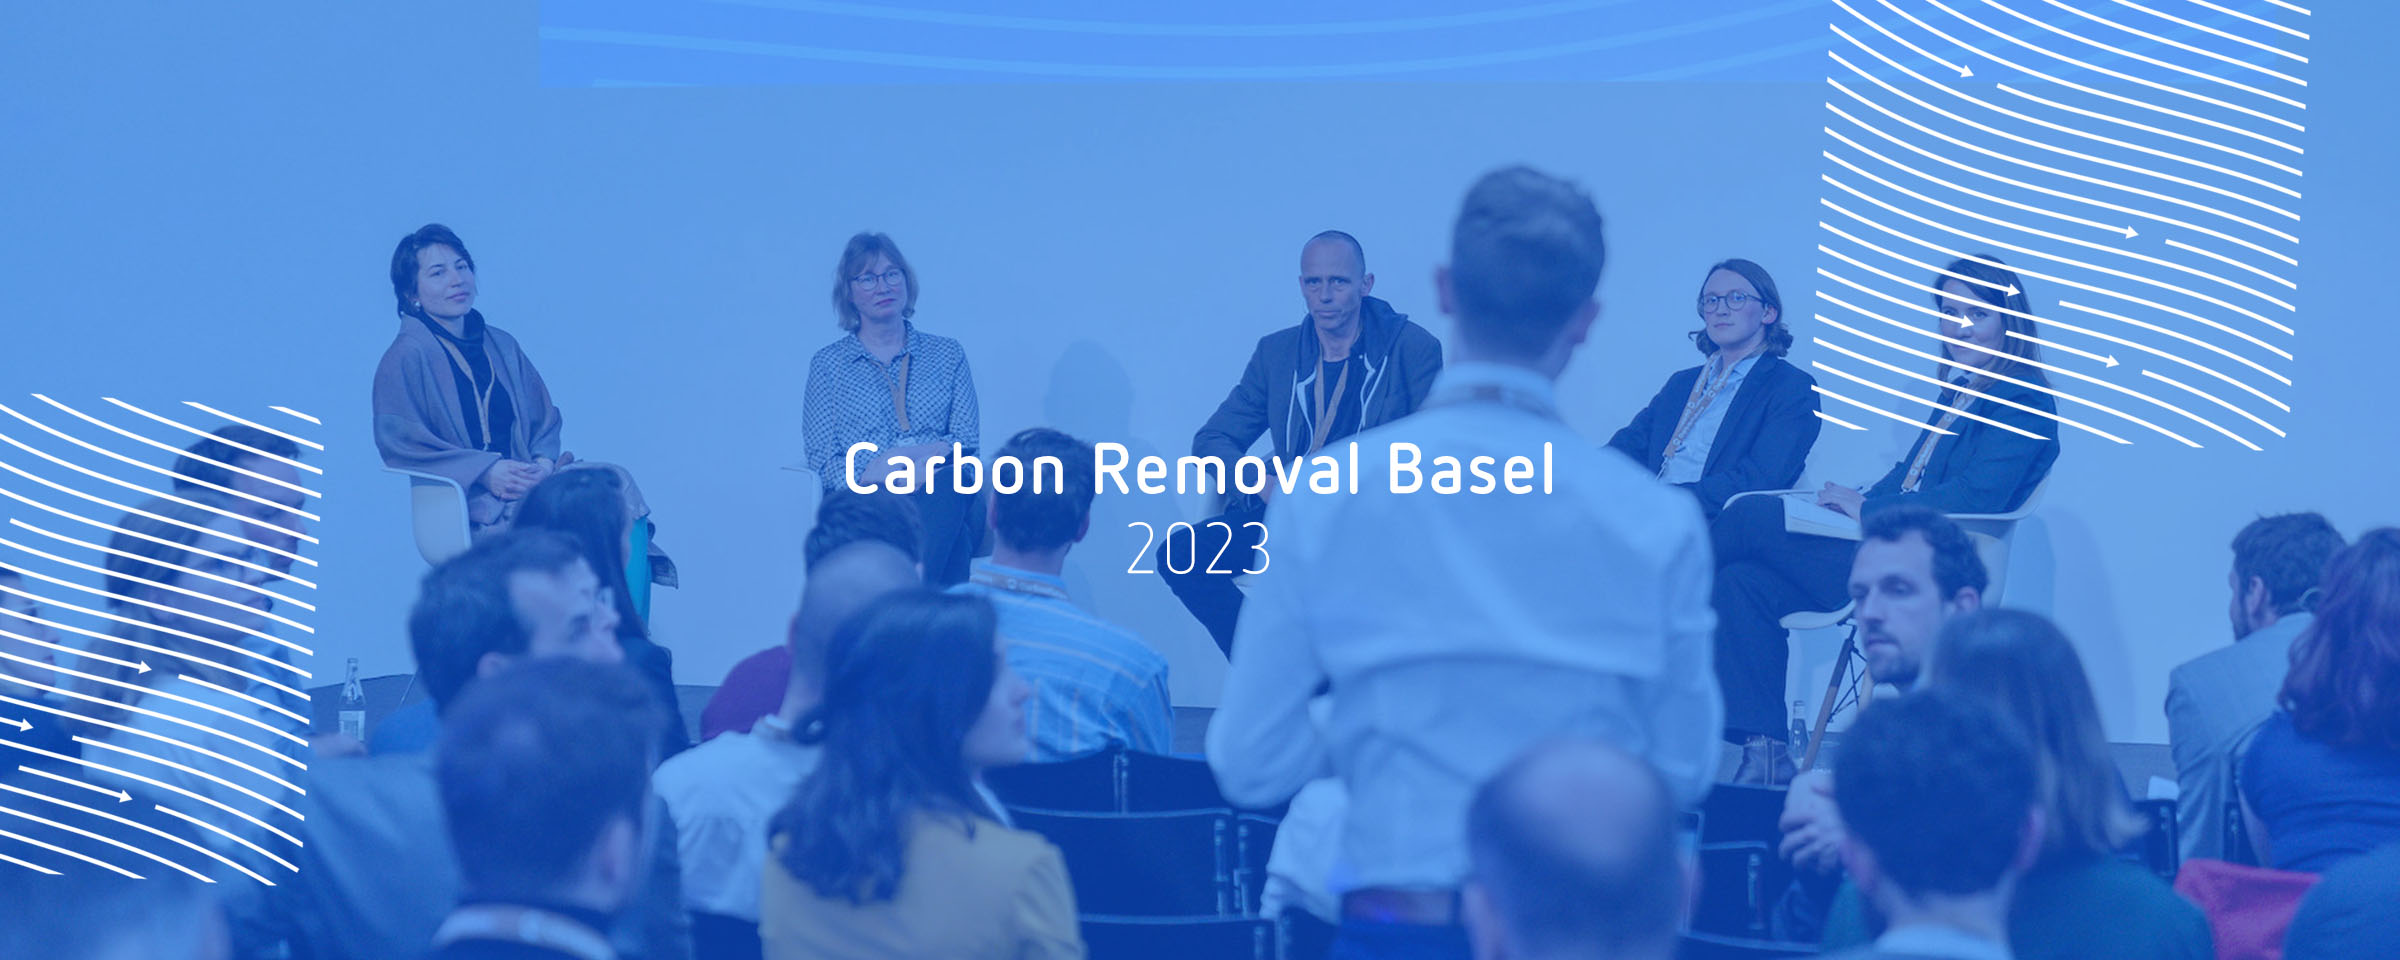 Carbon Removal Basel 2023